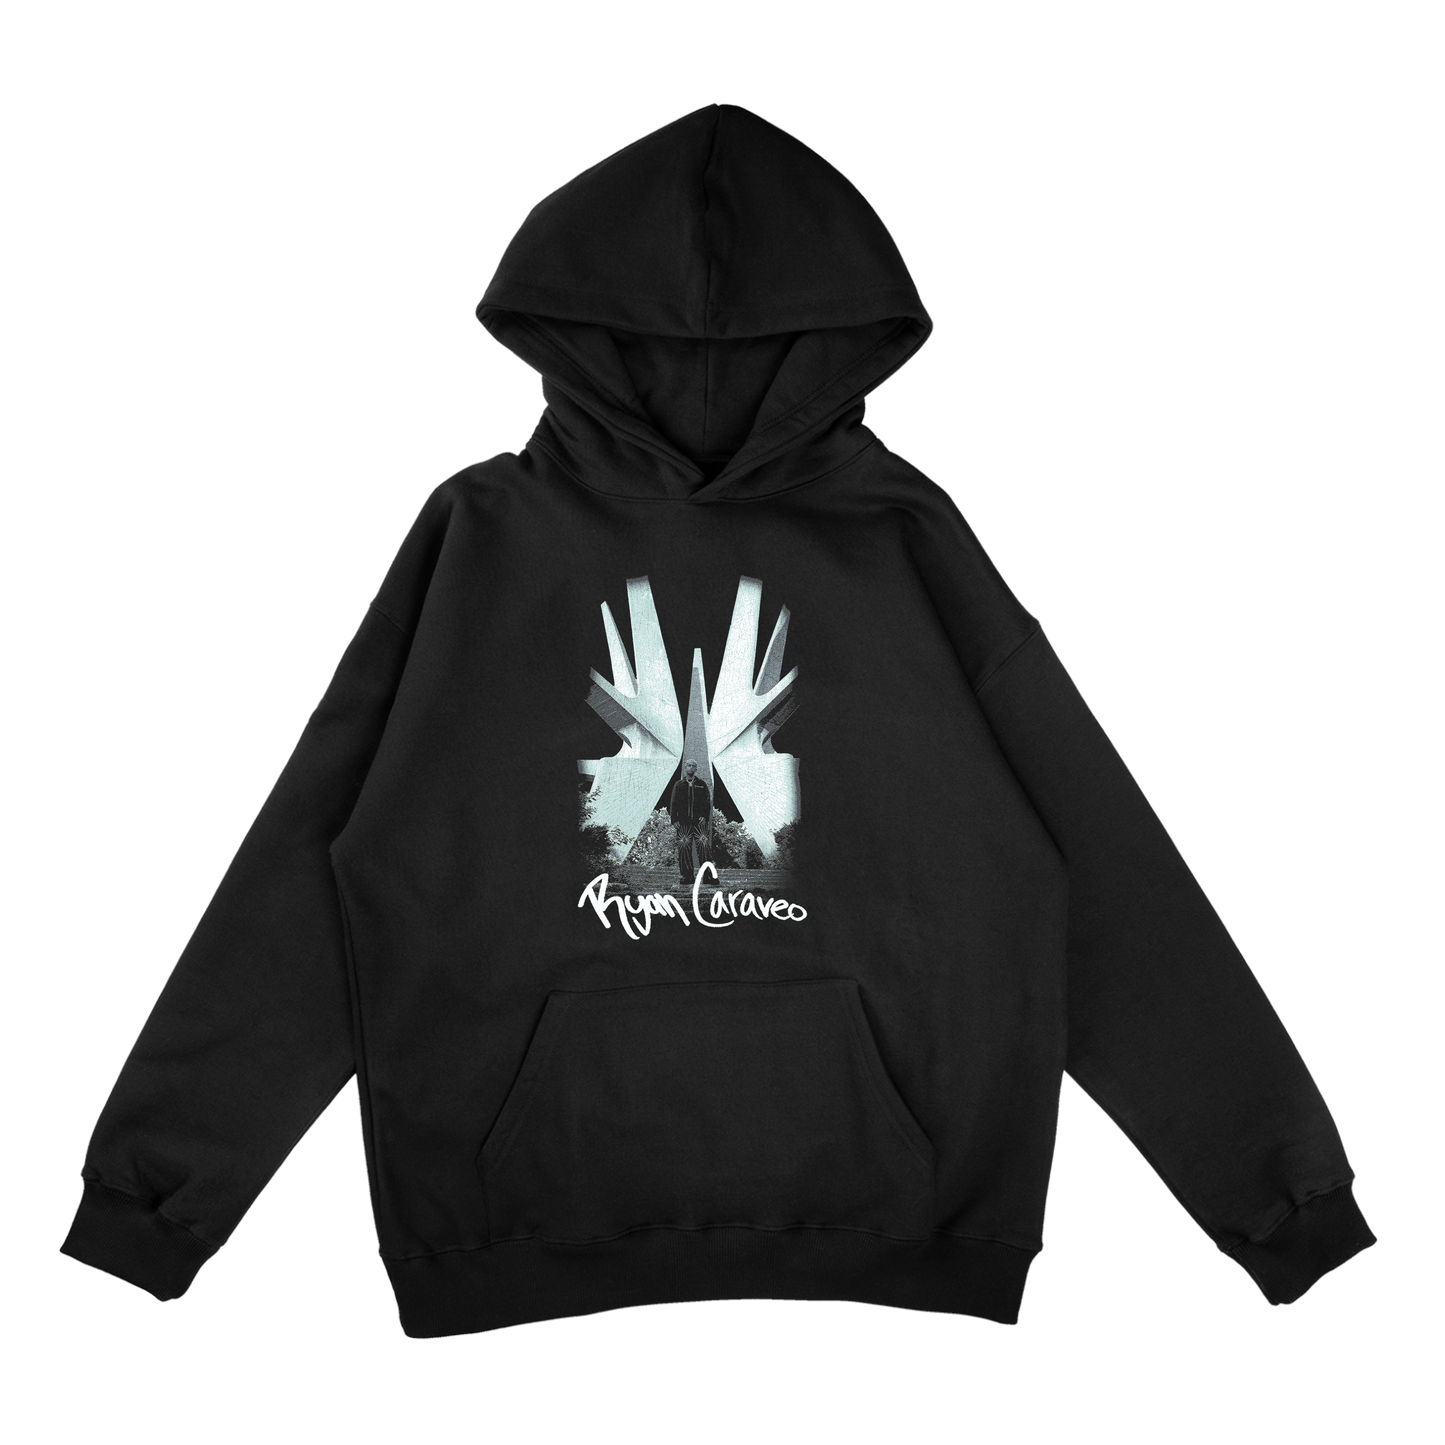 TROUBLE IN PARADISE TOUR HOODIE